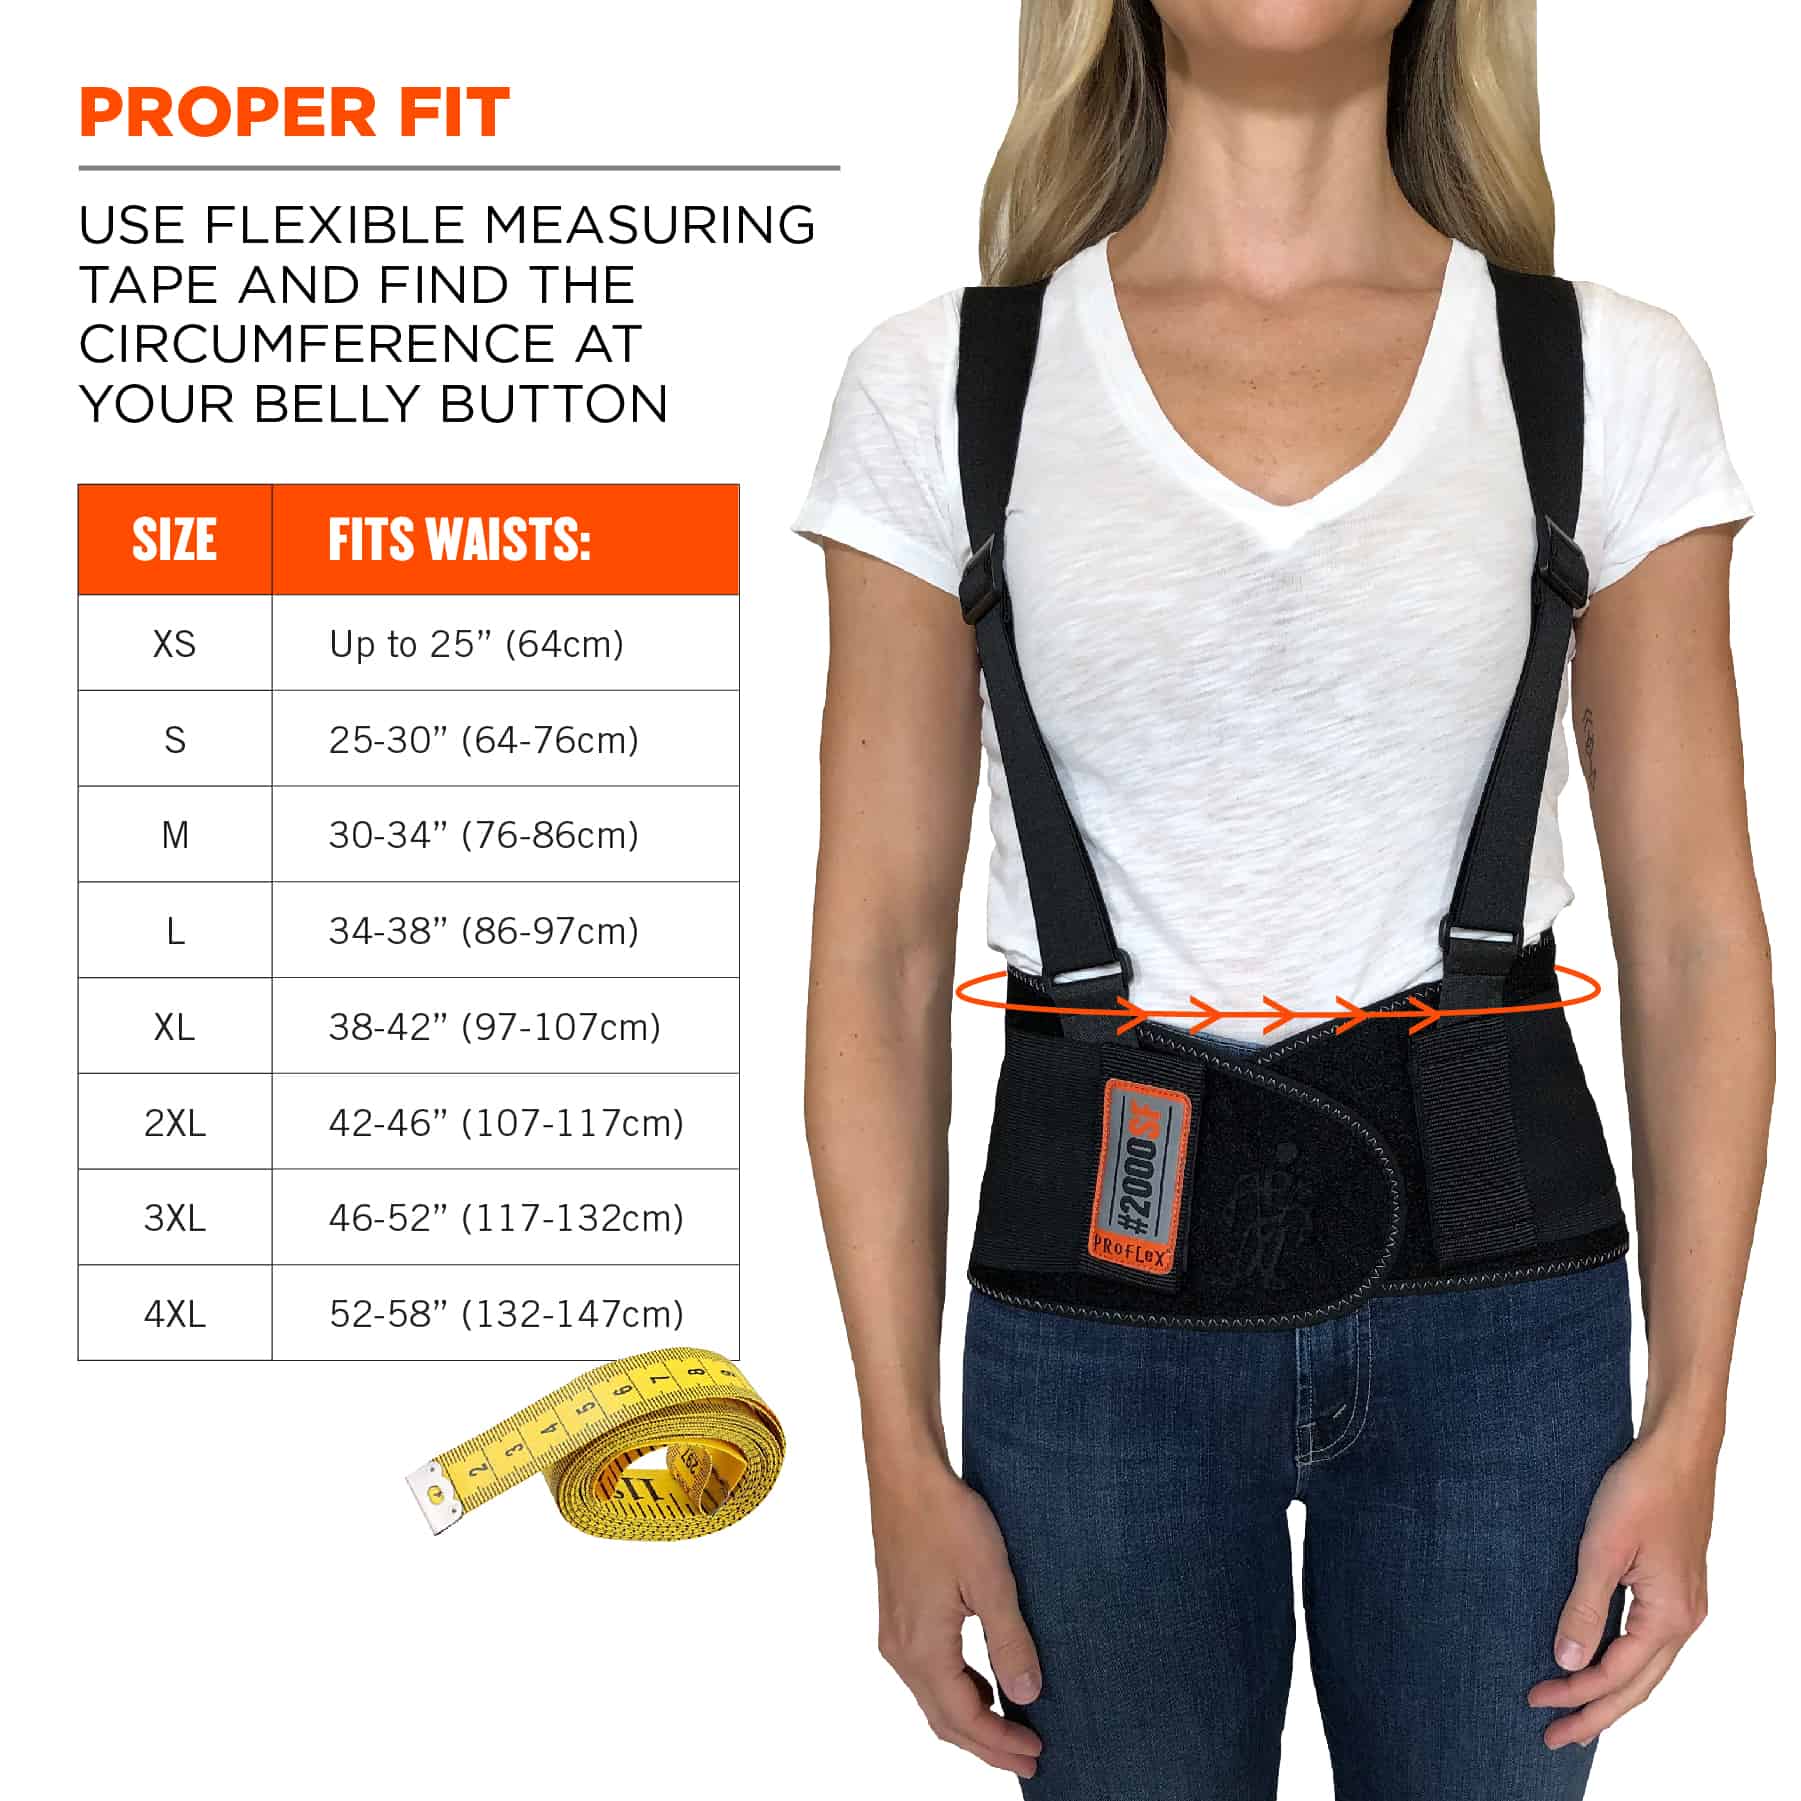 ADJUSTABLE WEIGHT LIFTING BELT ADJUSTABLE LUMBAR SUPPORT FITS UP TO 42" WAIST 